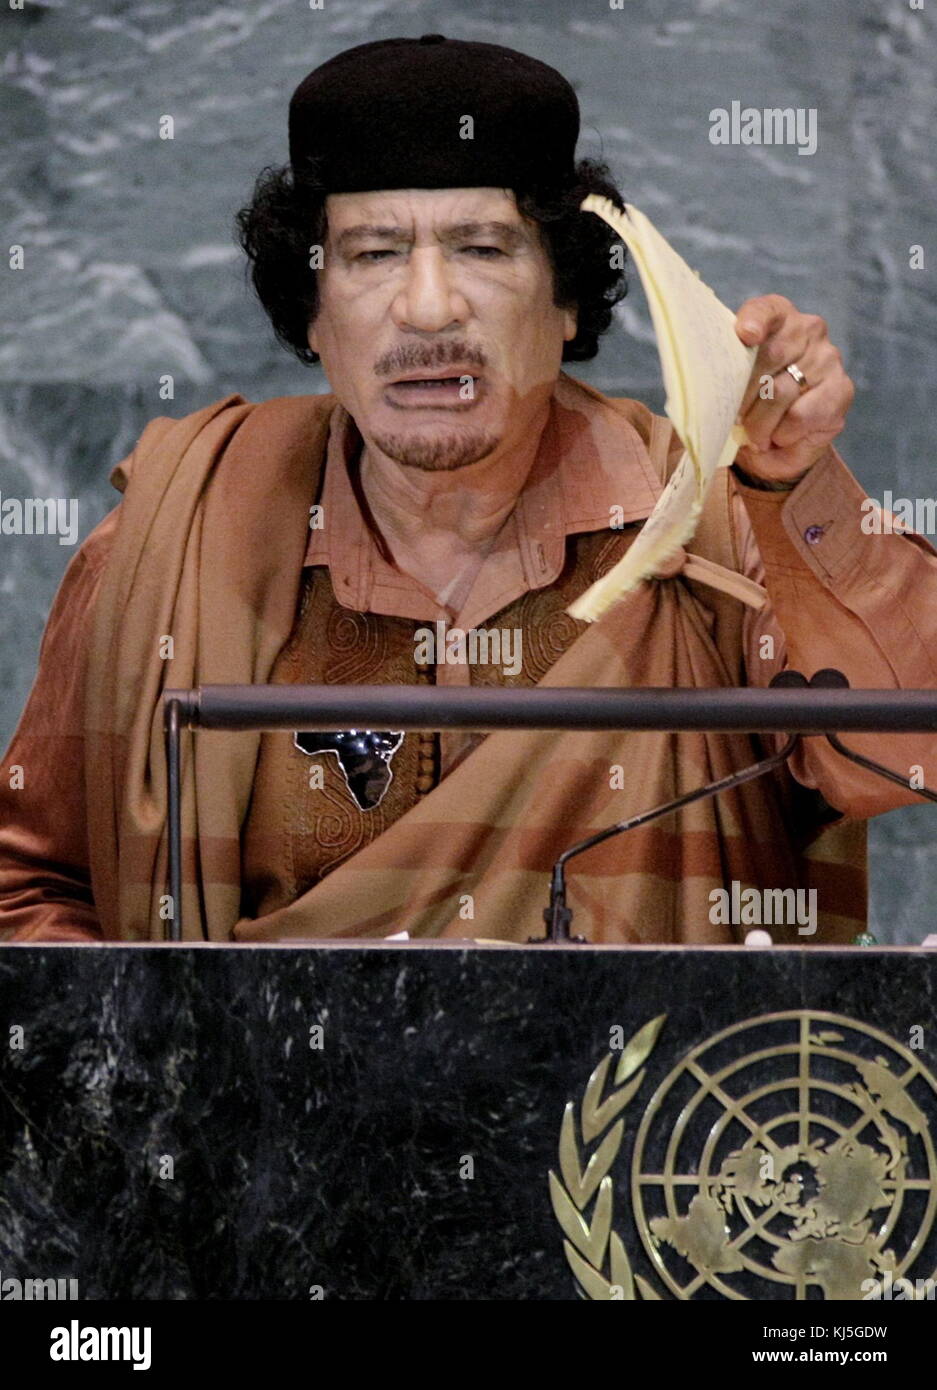 Muammar Gaddafi (1942 – 20 October 2011), Colonel Gaddafi, was a Libyan revolutionary, politician, and political theorist. He governed Libya as Revolutionary Chairman of the Libyan Arab Republic from 1969 to 1977 and then as the 'Brotherly Leader' of the Great Socialist People's Libyan Arab Jamahiriya from 1977 to 2011. Stock Photo